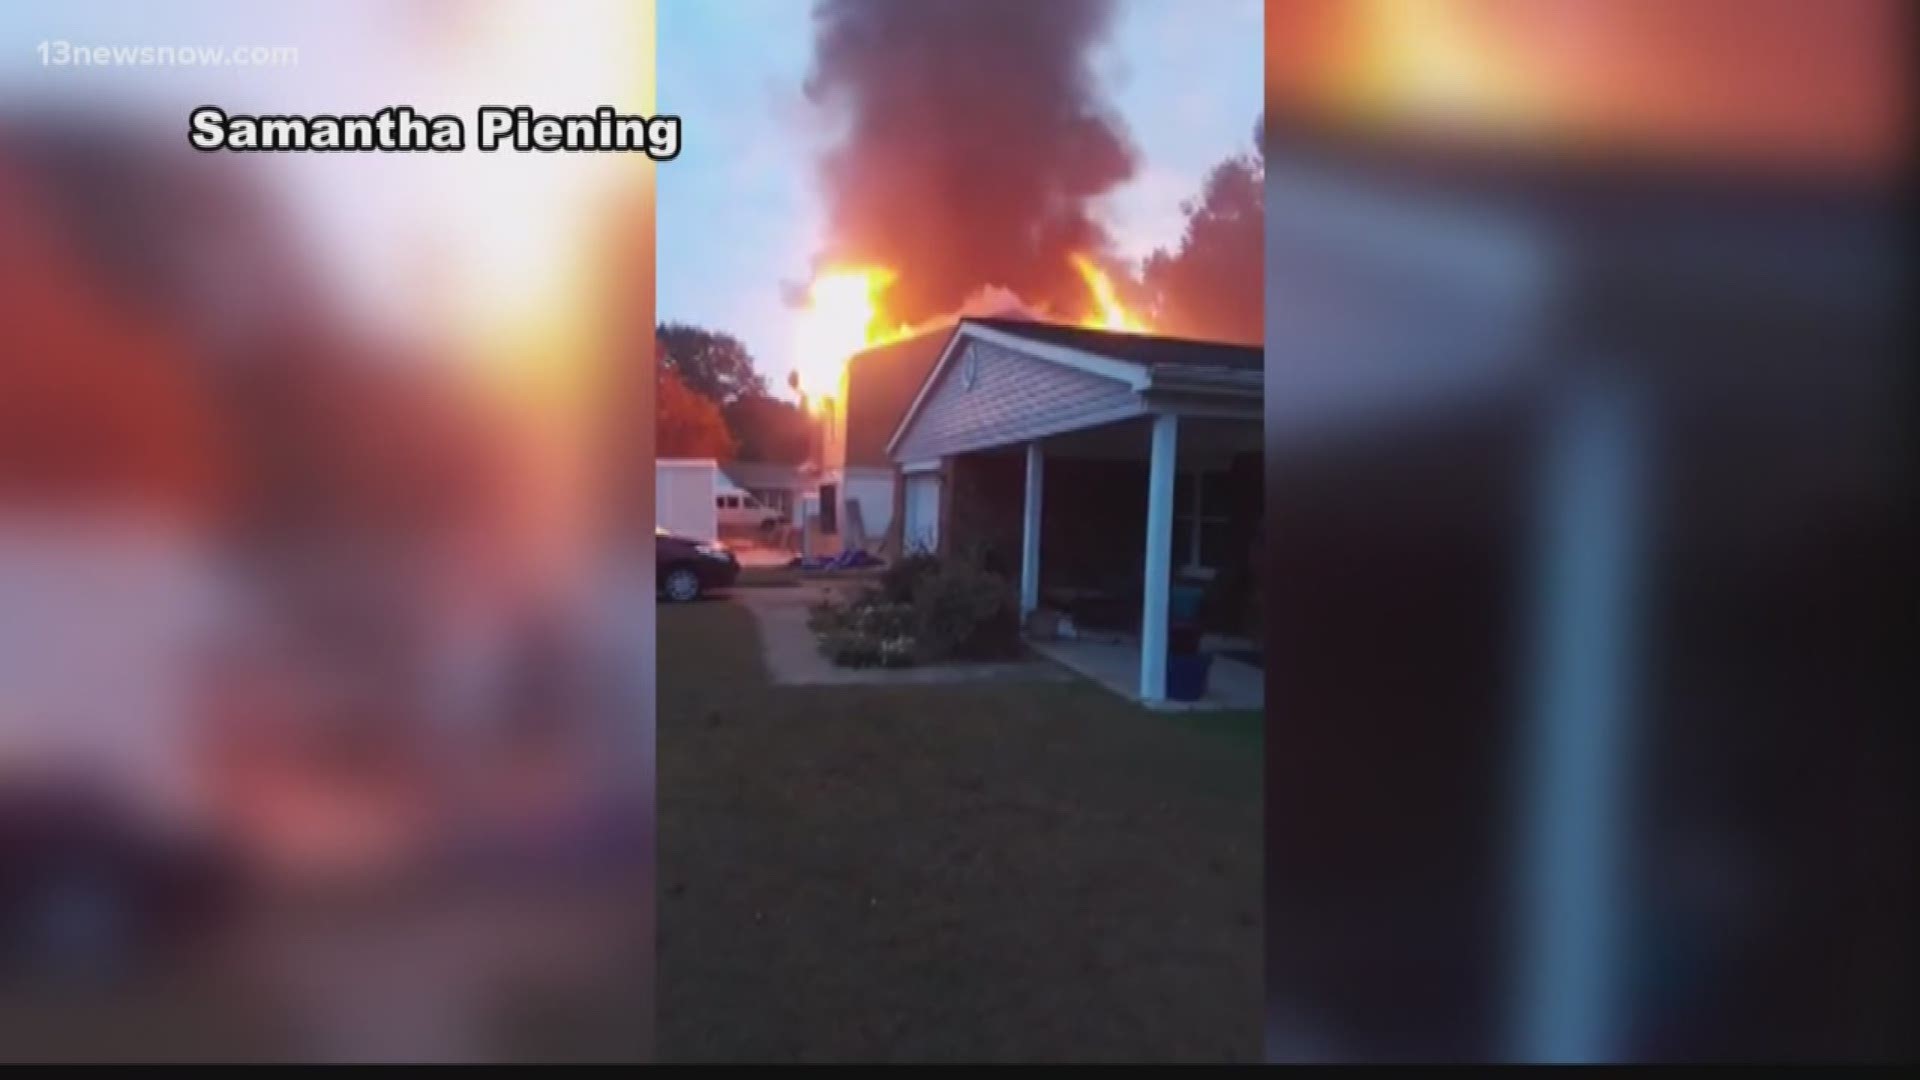 Virginia Beach home catches on fire for the second time in one year. The fire damaged the building so badly that people could see the smoke from miles away.